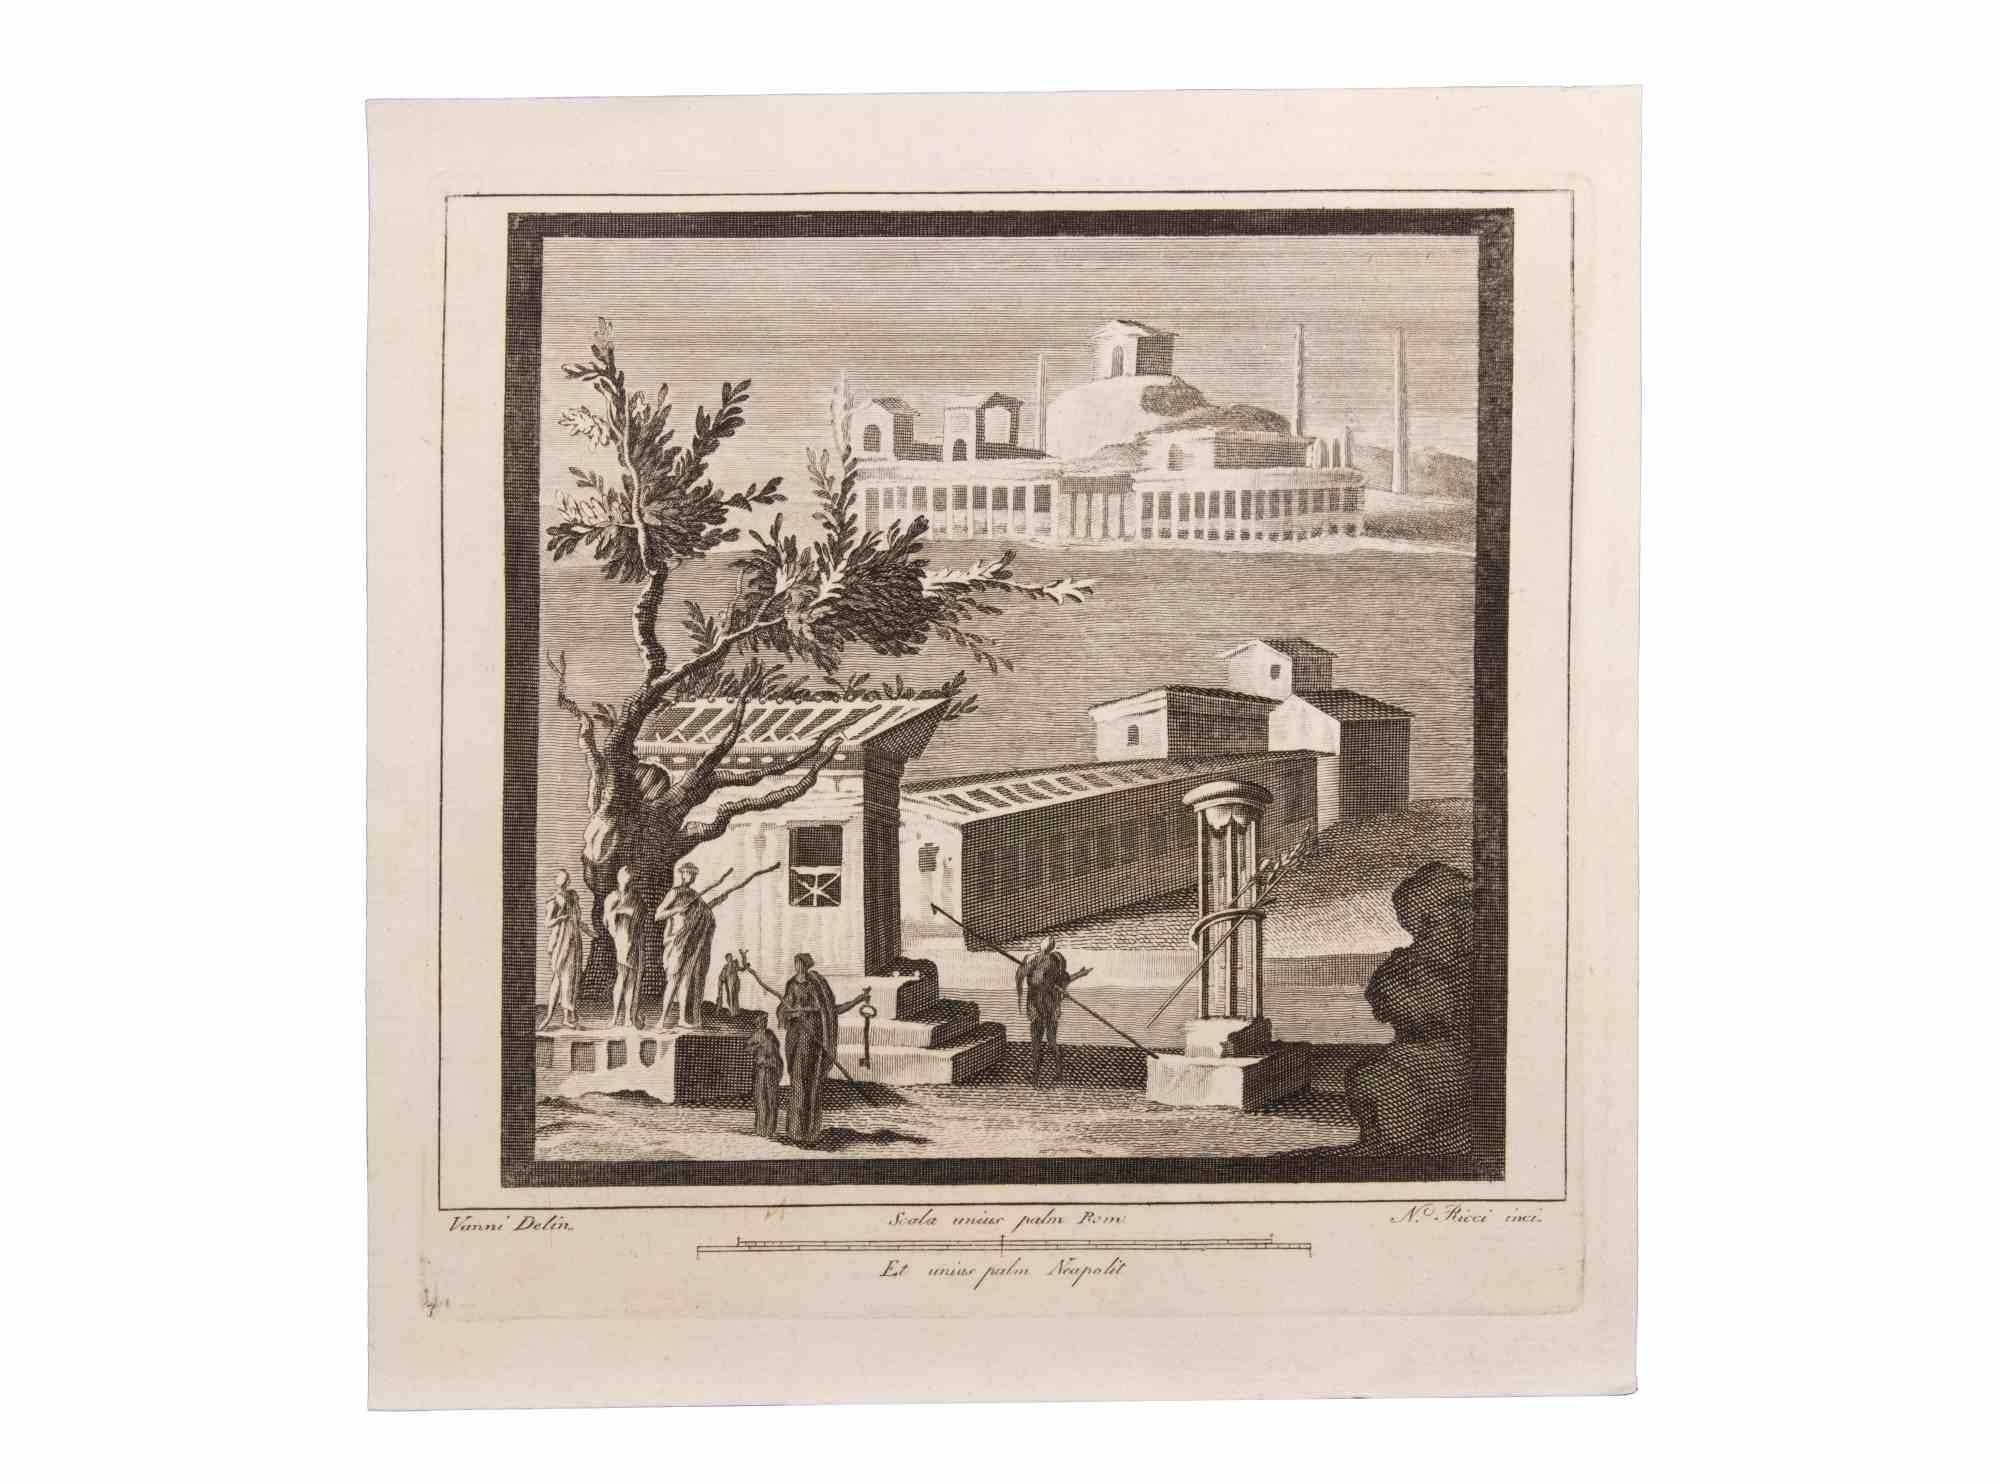 Seascape With Monuments and Figures is an Etching realized by  Niccolò Vanni (1750-1770).

The etching belongs to the print suite “Antiquities of Herculaneum Exposed” (original title: “Le Antichità di Ercolano Esposte”), an eight-volume volume of